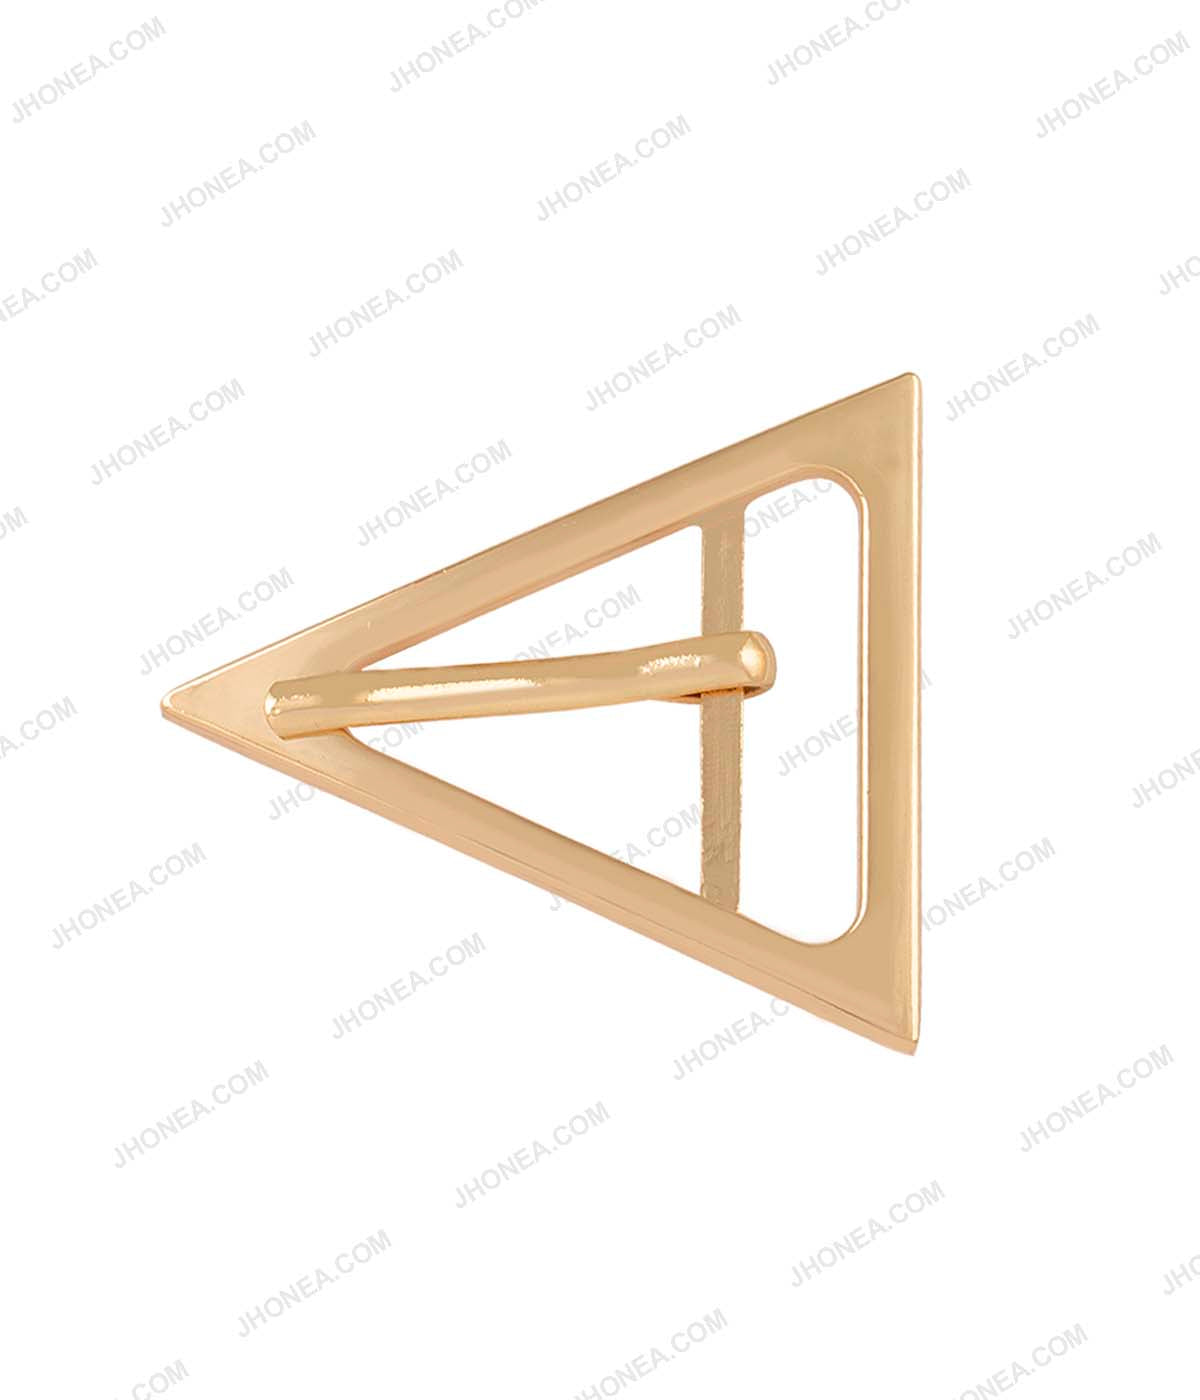 Triangle Geometric Structure Prong Belt Buckle in Shiny Gold Colour for Western Dresses